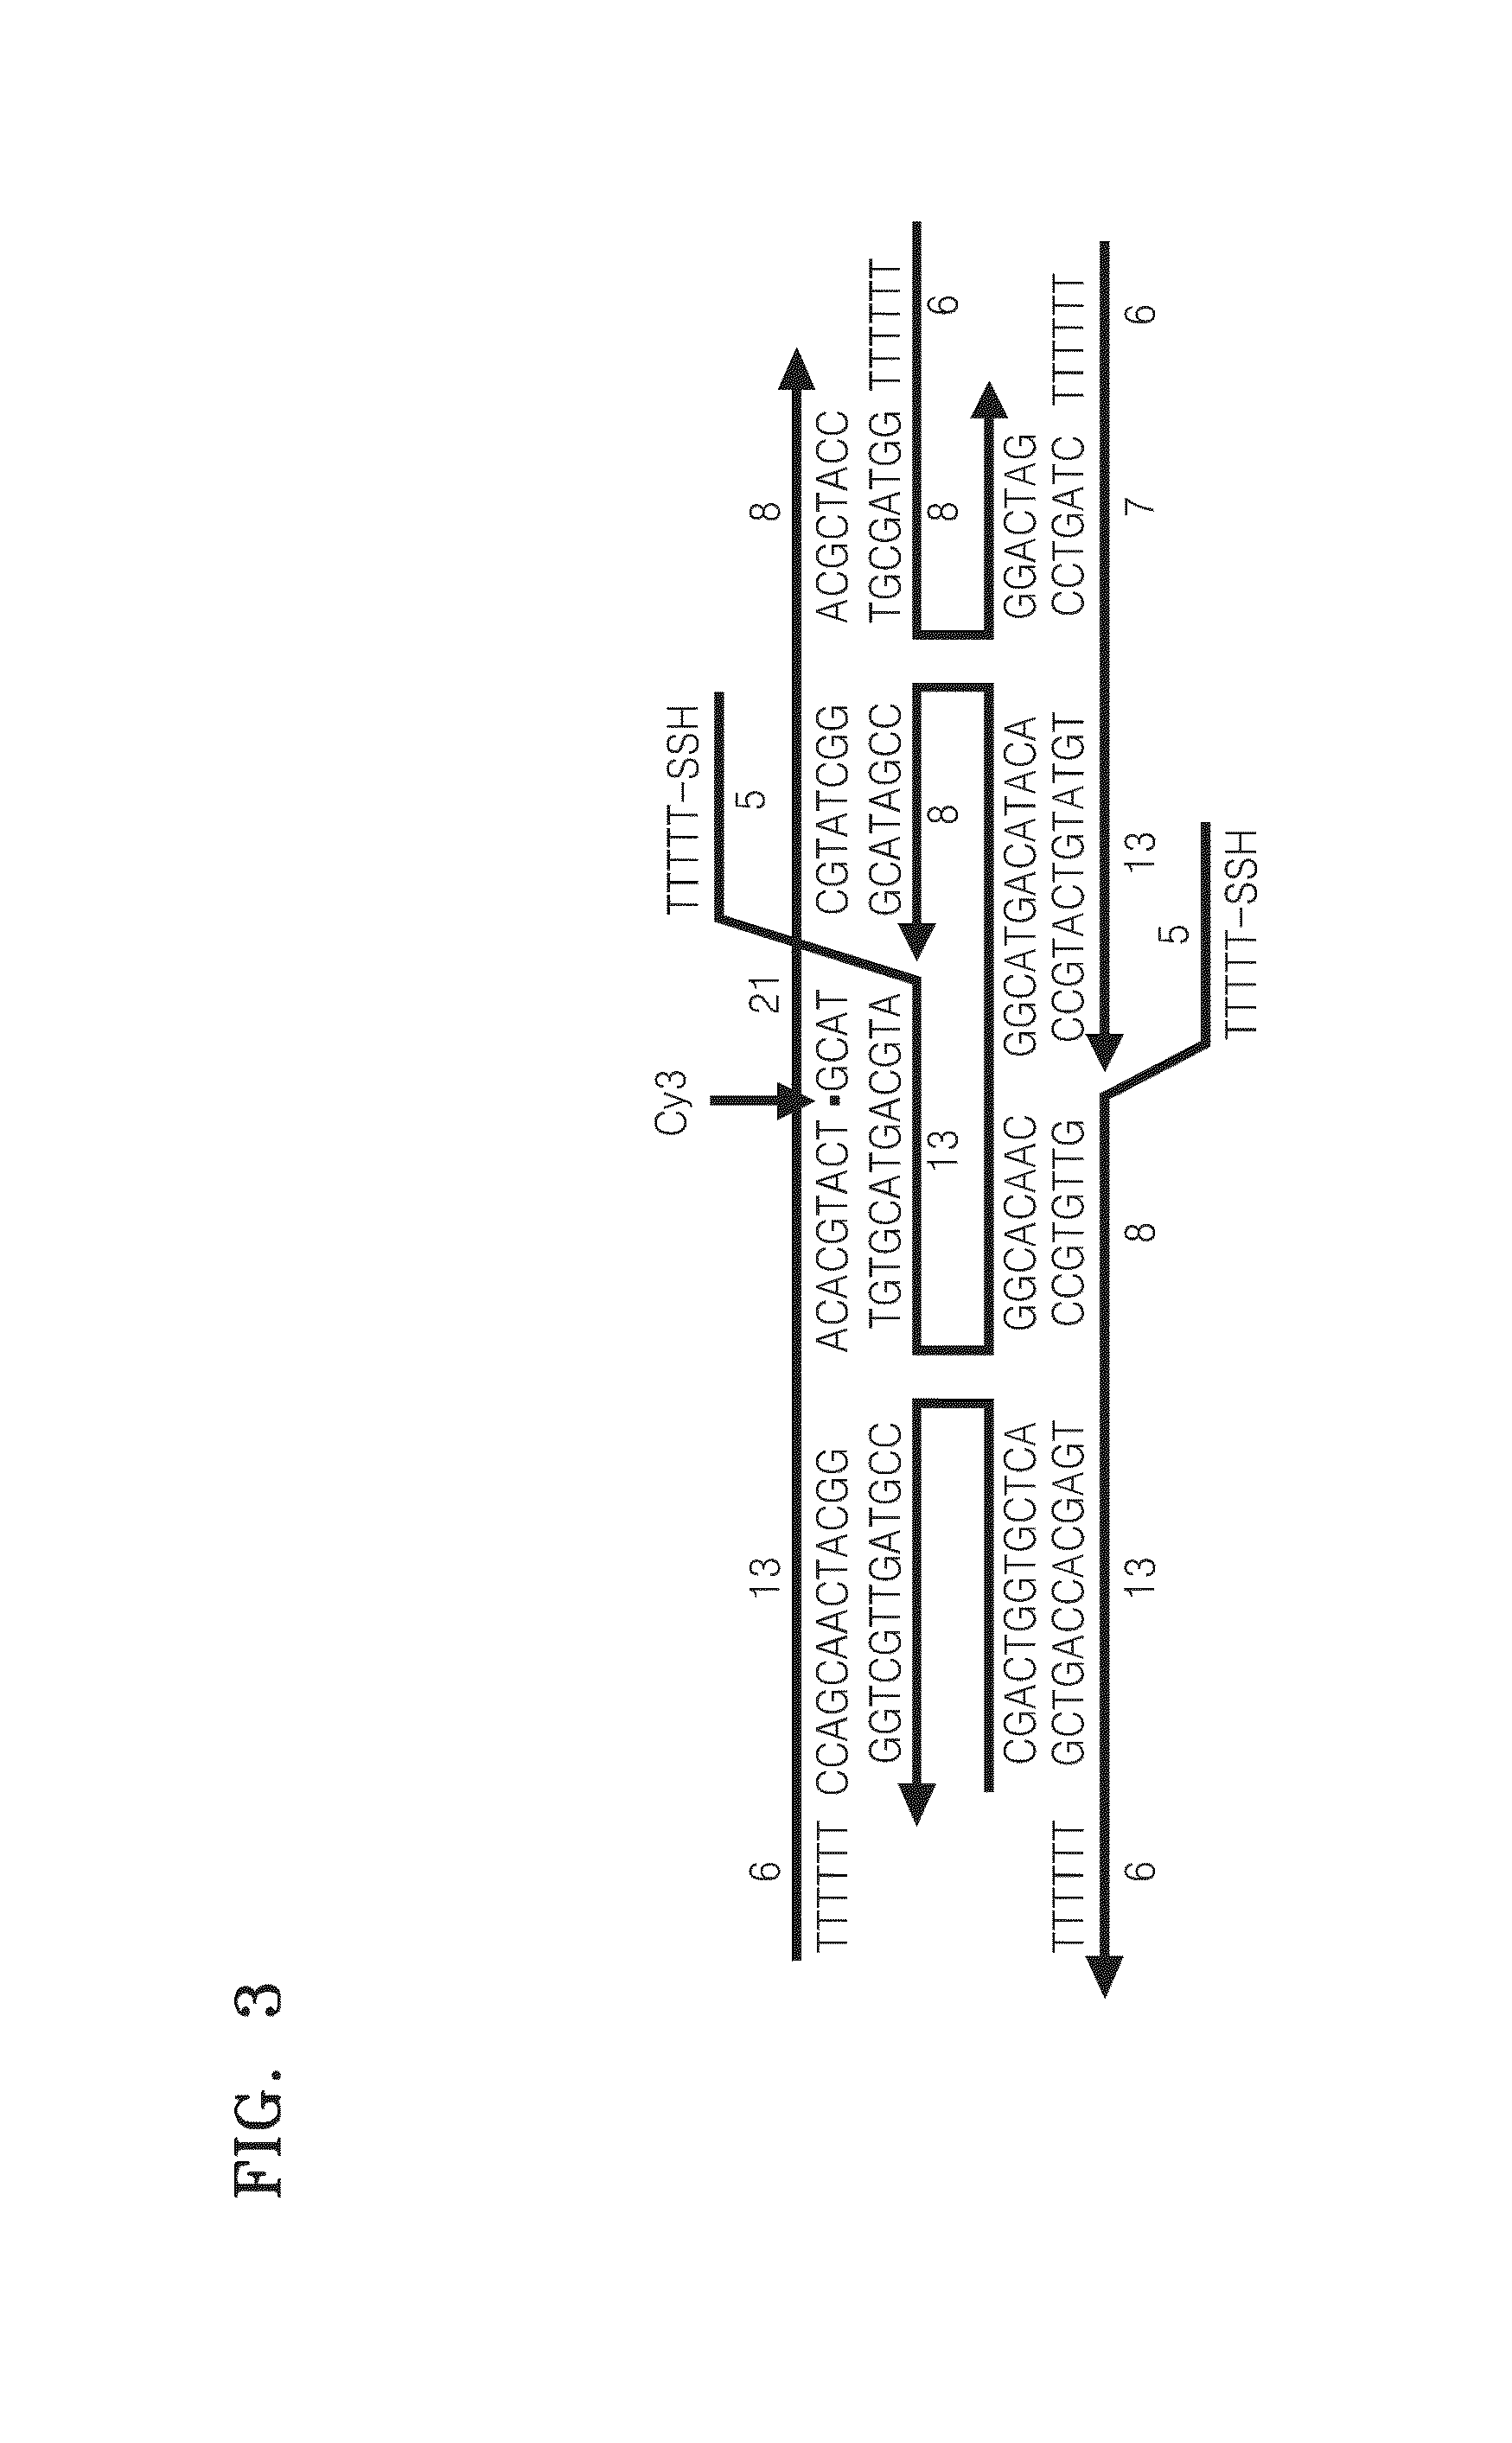 Interparticle spacing material including nucleic acid structures and use thereof